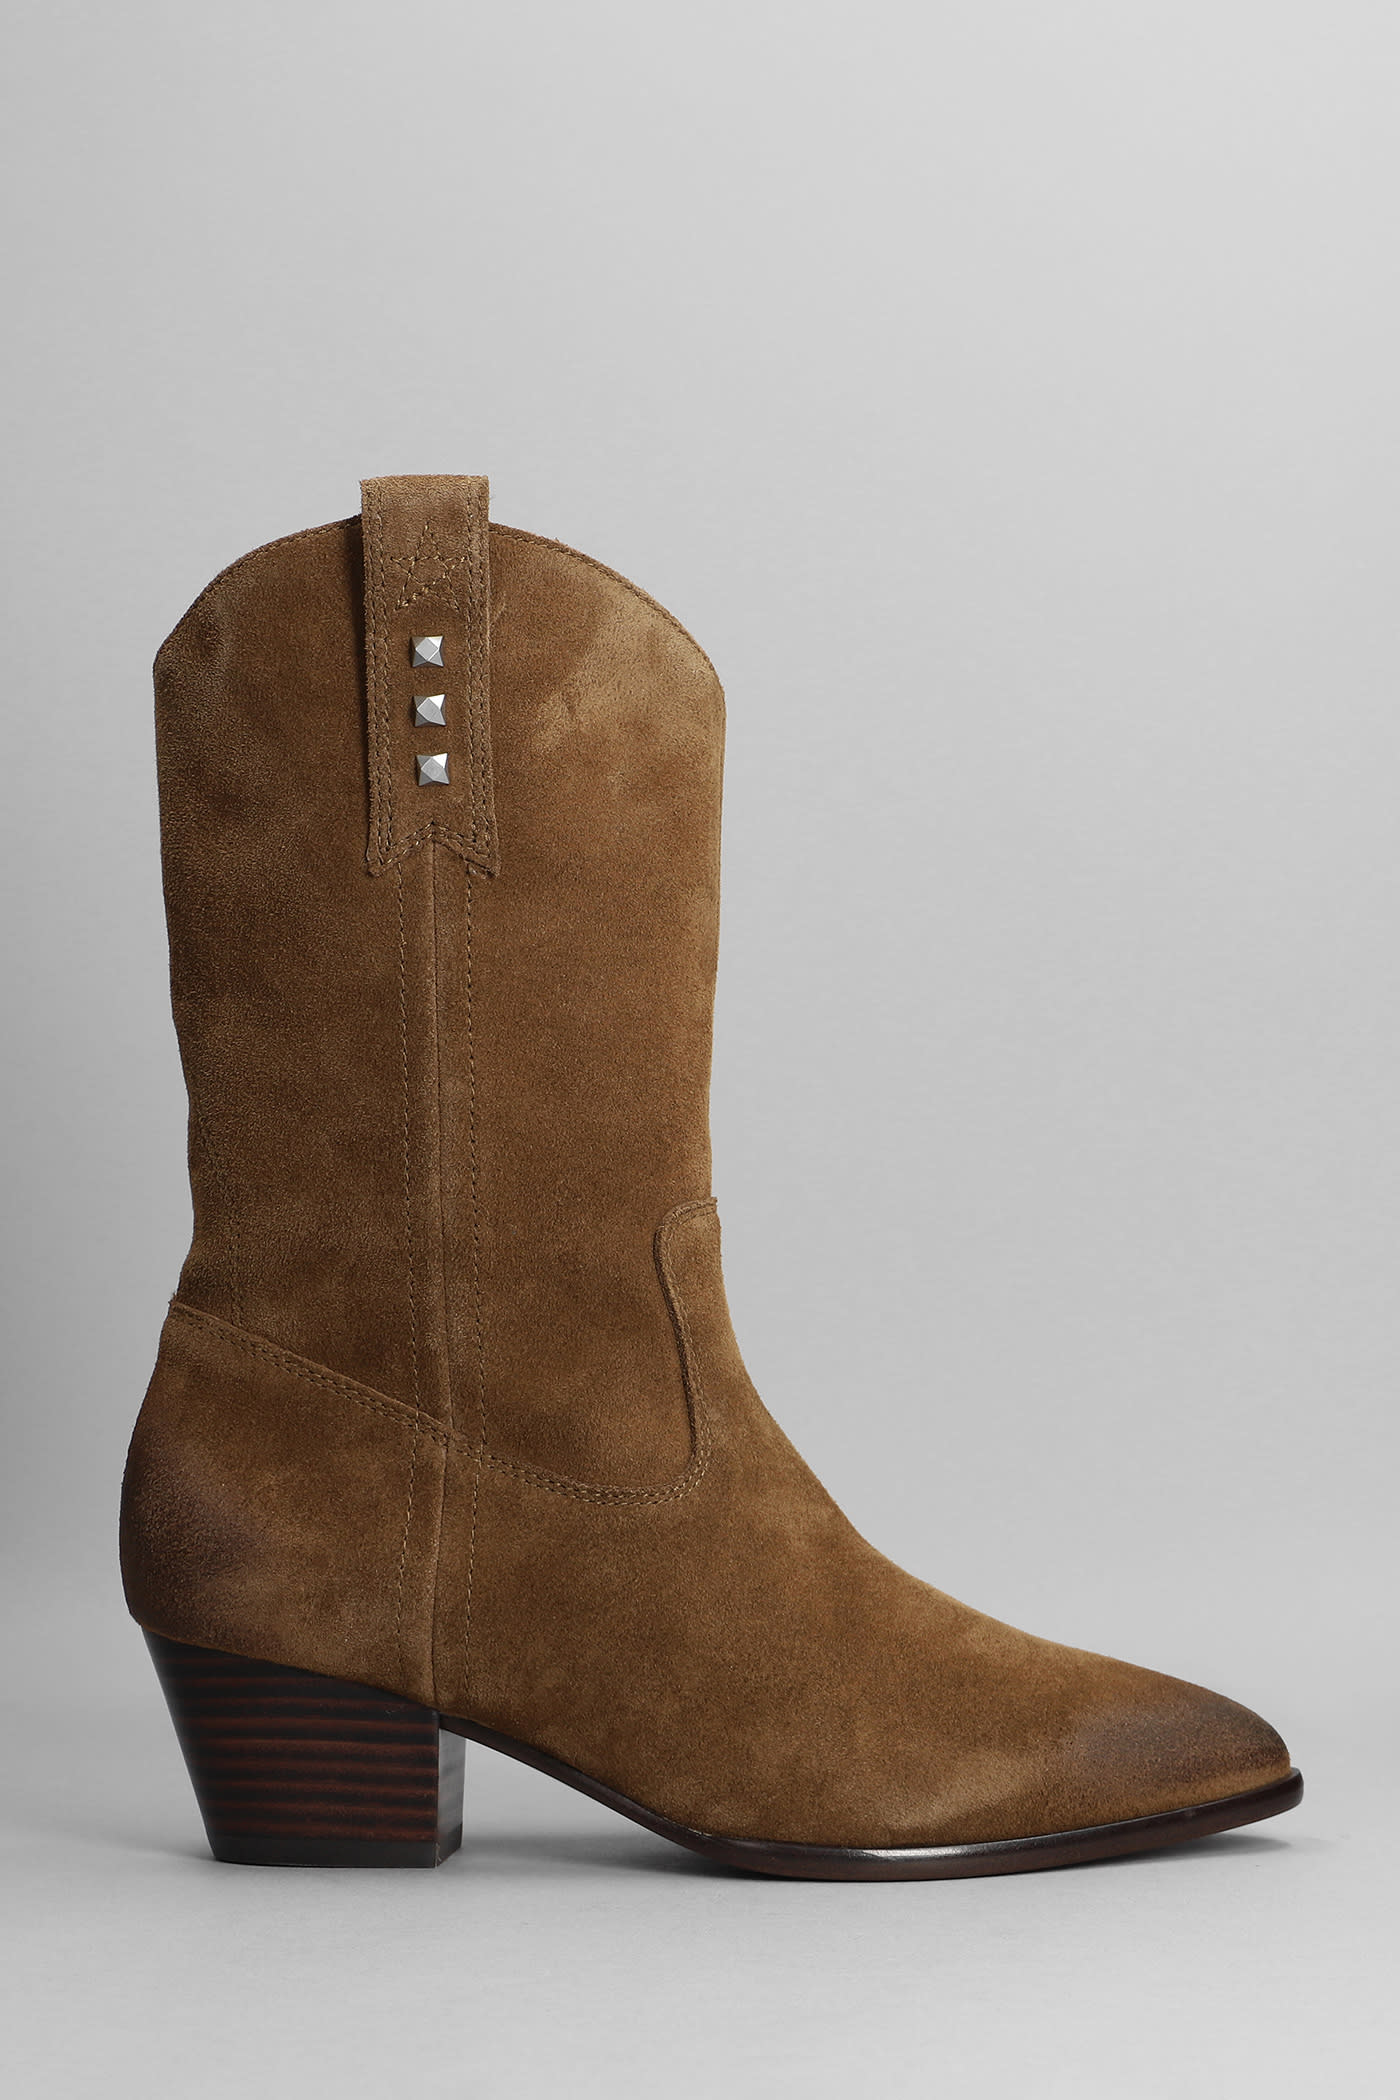 Ash Hooper Texan Ankle Boots In Brown Suede